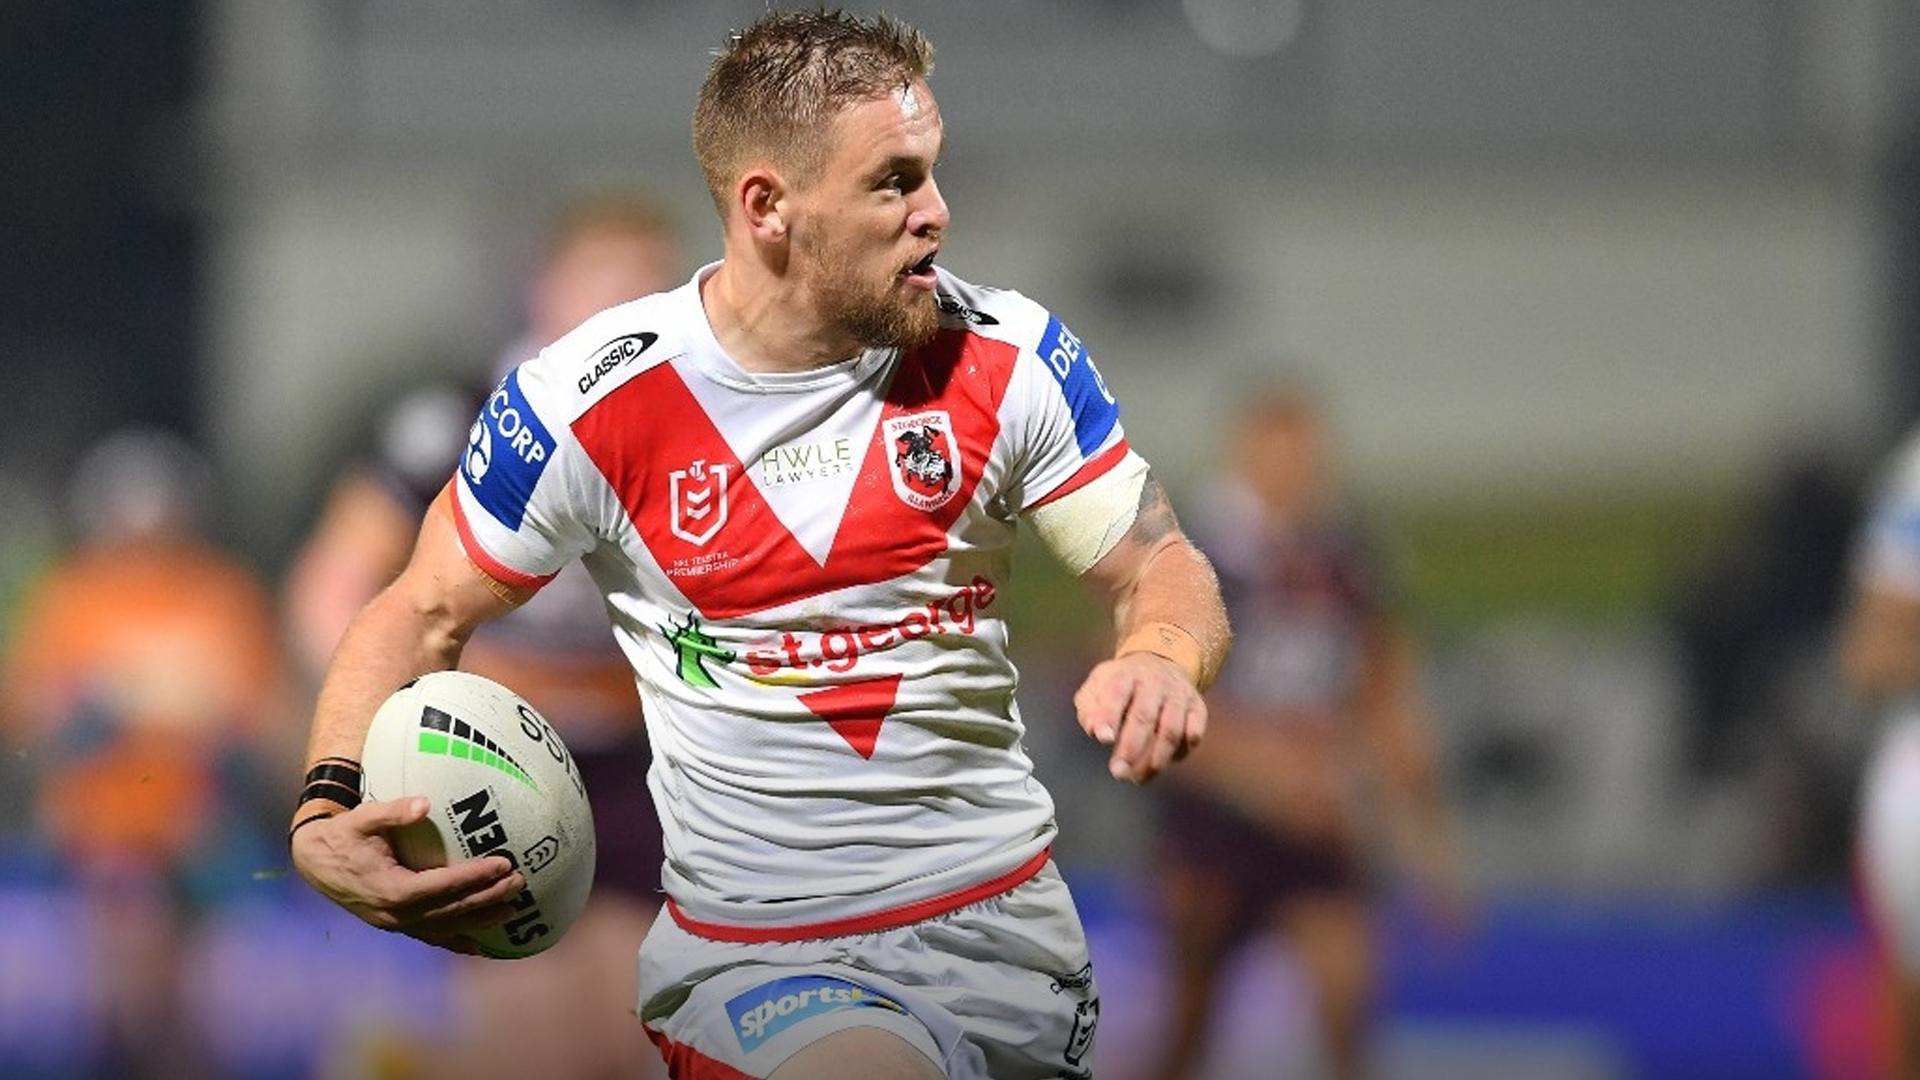 ‘Heartbroken’ Dufty wants to stay in Red V: “All I ever wanted was to play for St George”